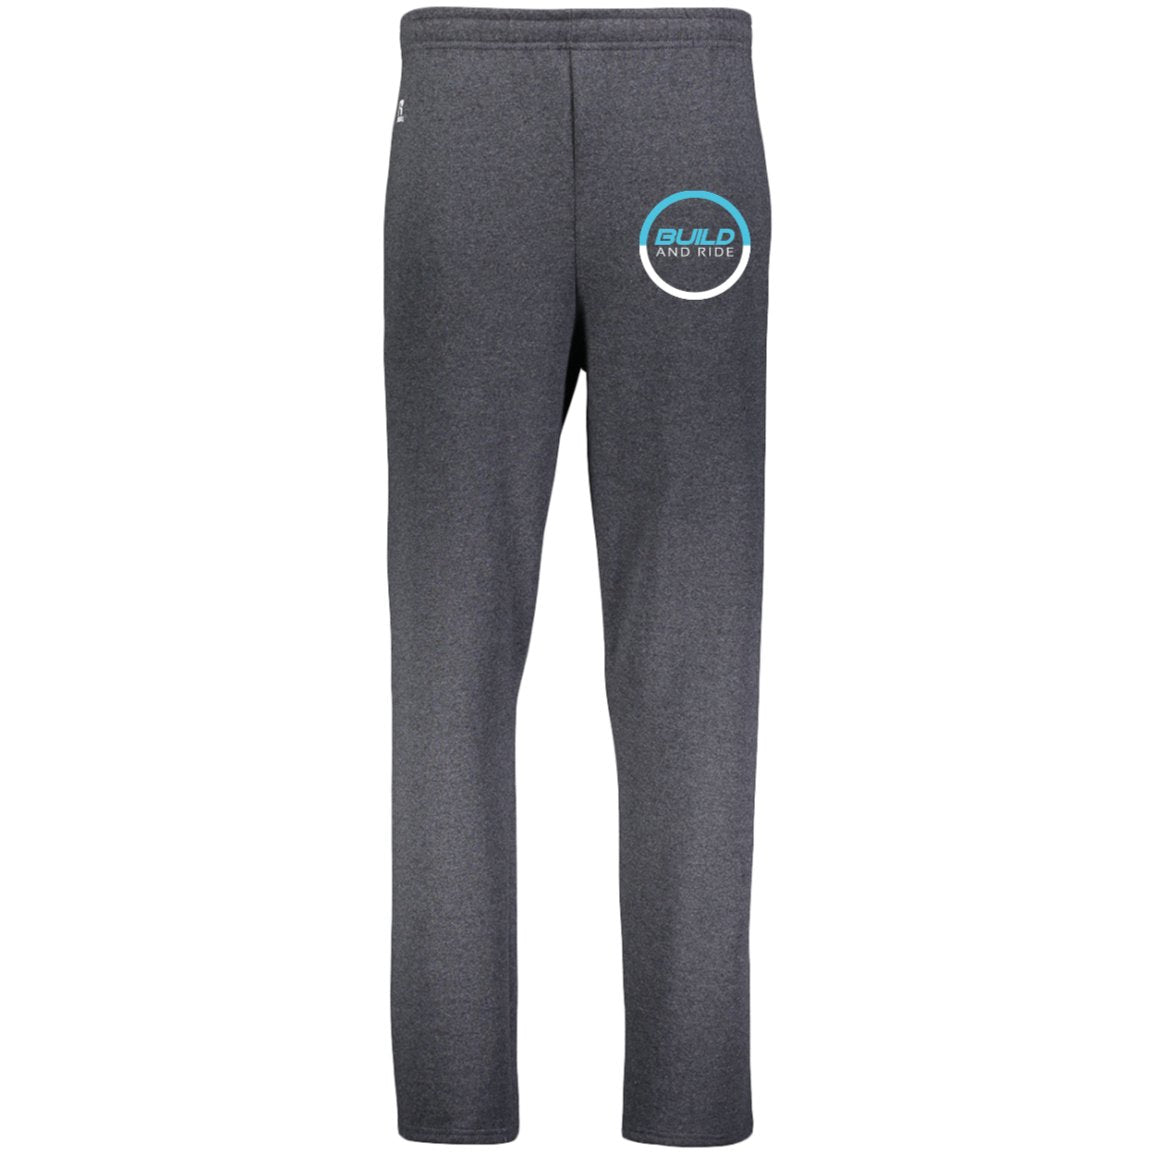 Build And Ride Sweatpants - Build And Ride